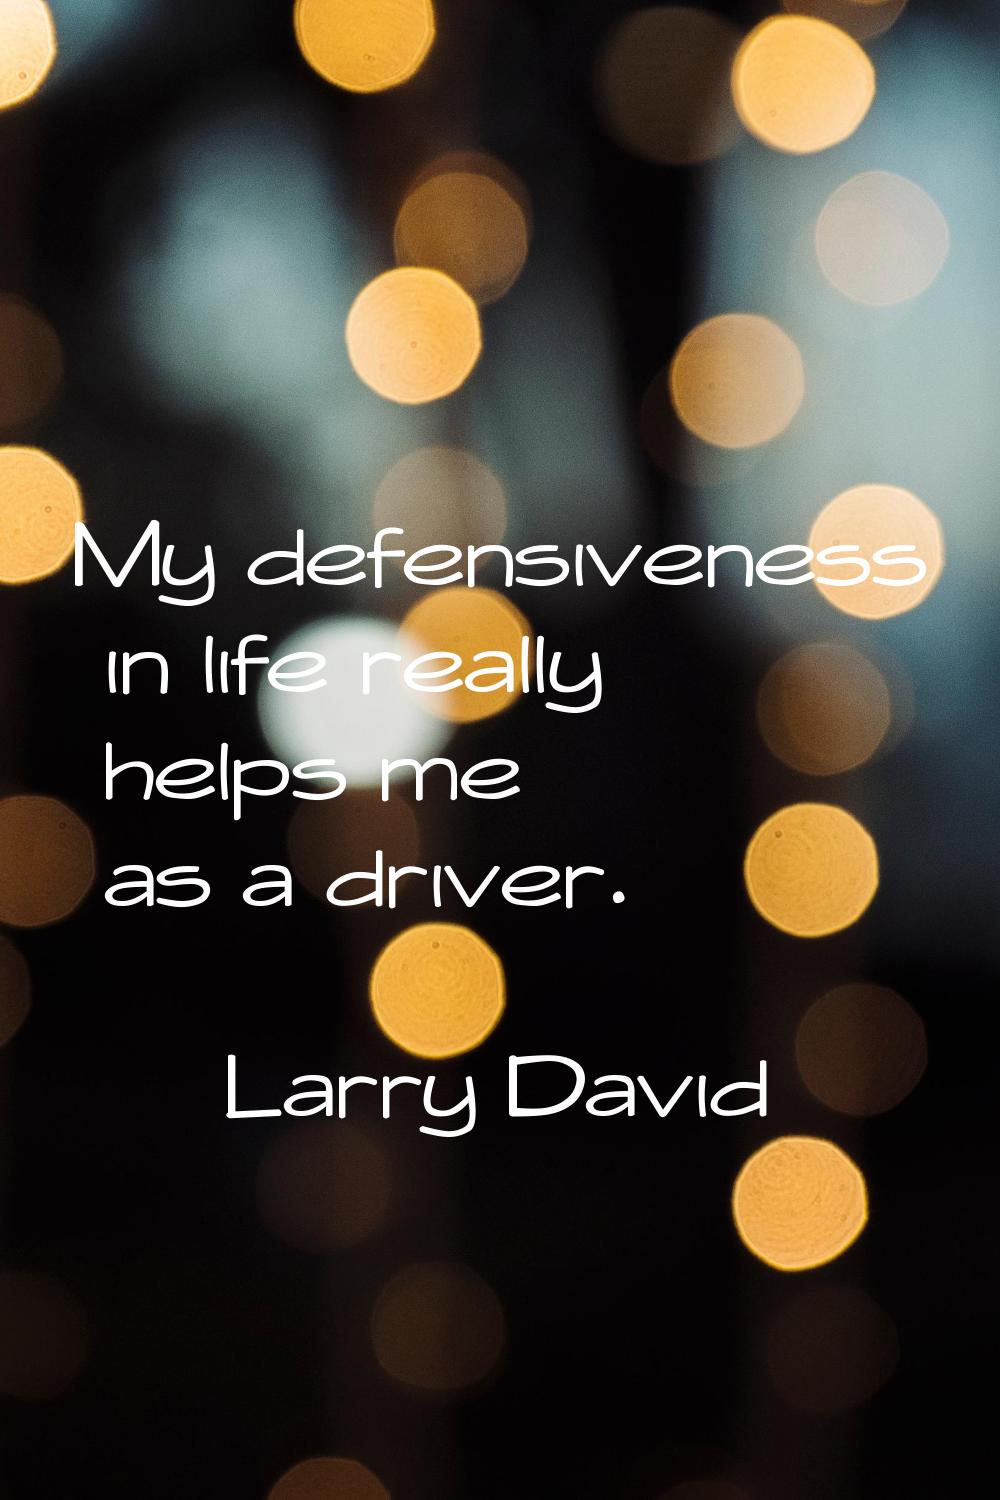 My defensiveness in life really helps me as a driver.